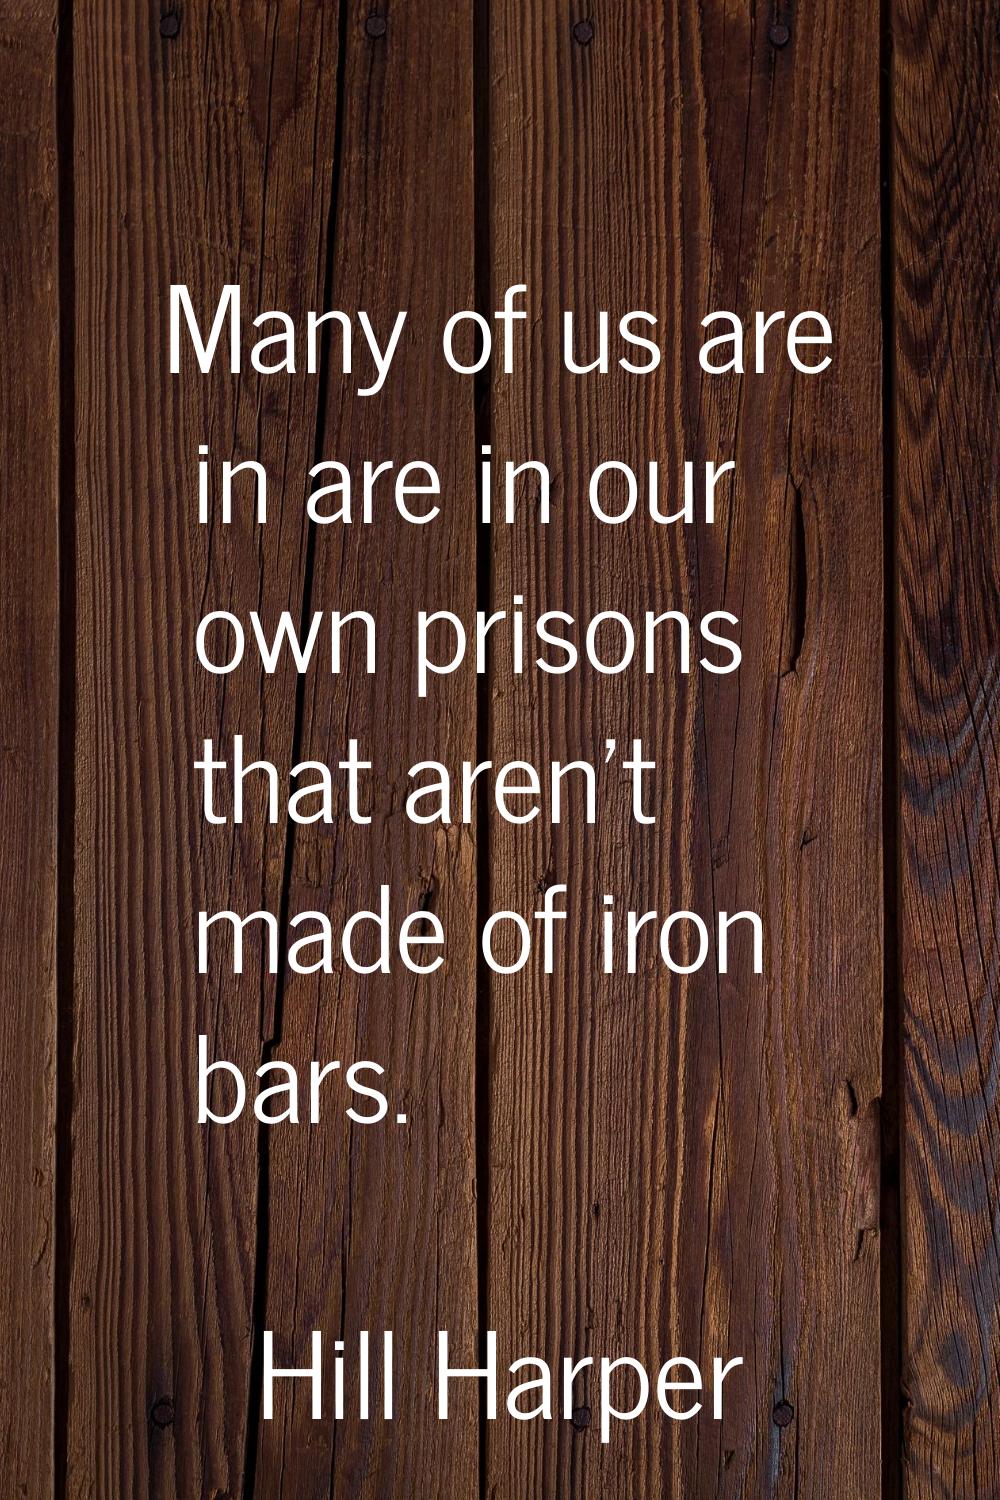 Many of us are in are in our own prisons that aren't made of iron bars.